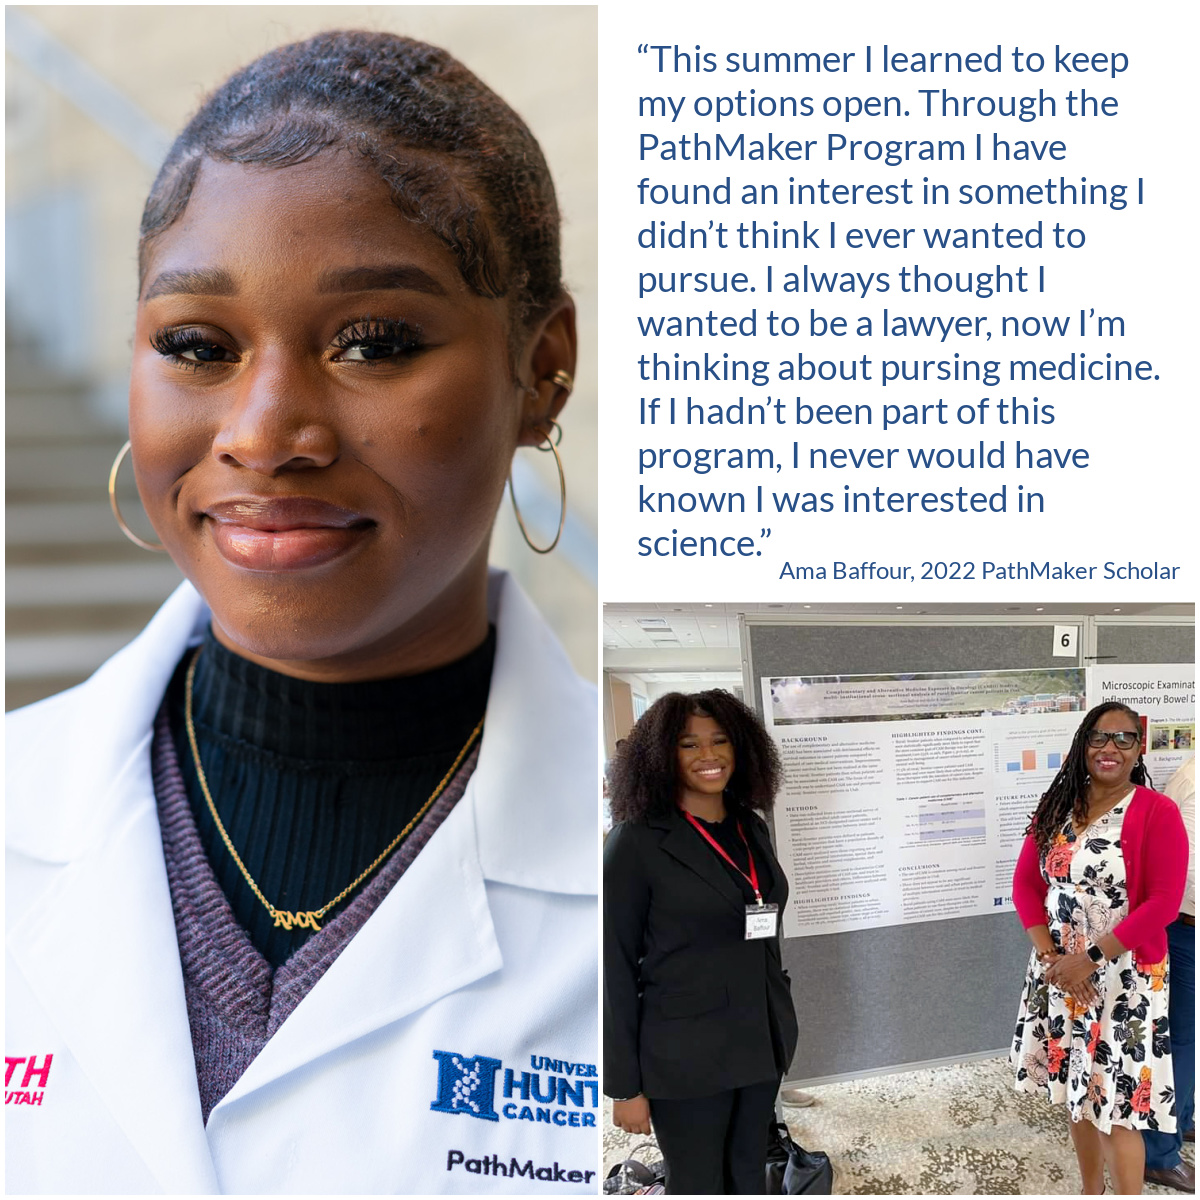 Until a friend encouraged Ama to apply for @pathmaker_hci she had planned on being a civil rights attorney. After researching rural & urban health disparities in @sky_john’s lab she has realized that she is interested in making a difference through health care.